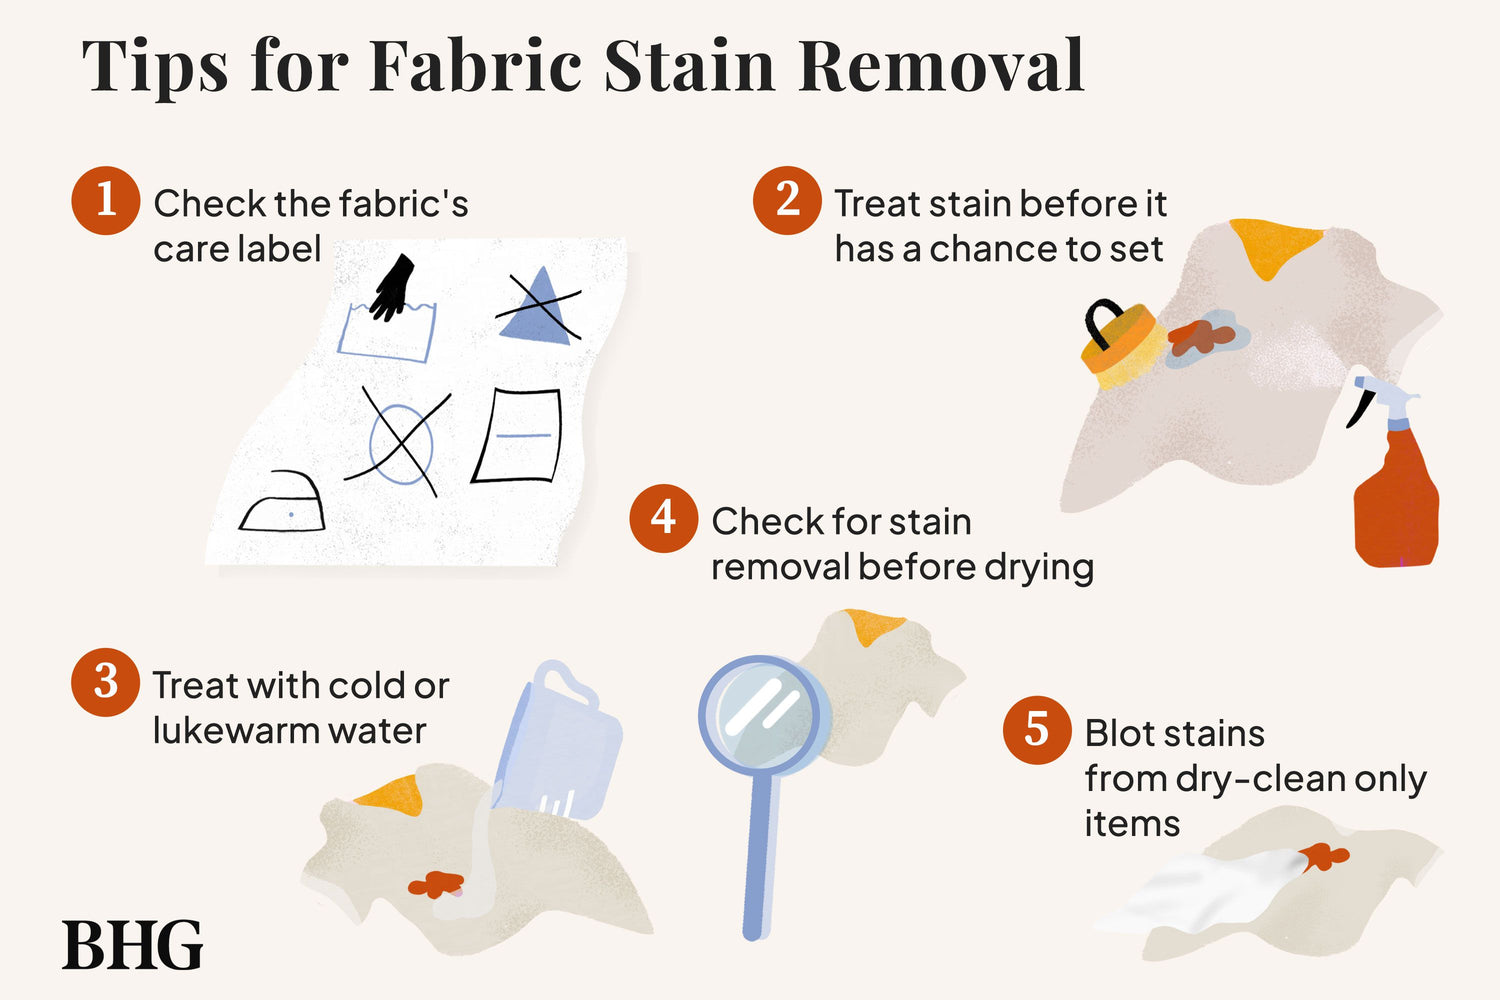 How To Get A Stain Out Of A Shirt?